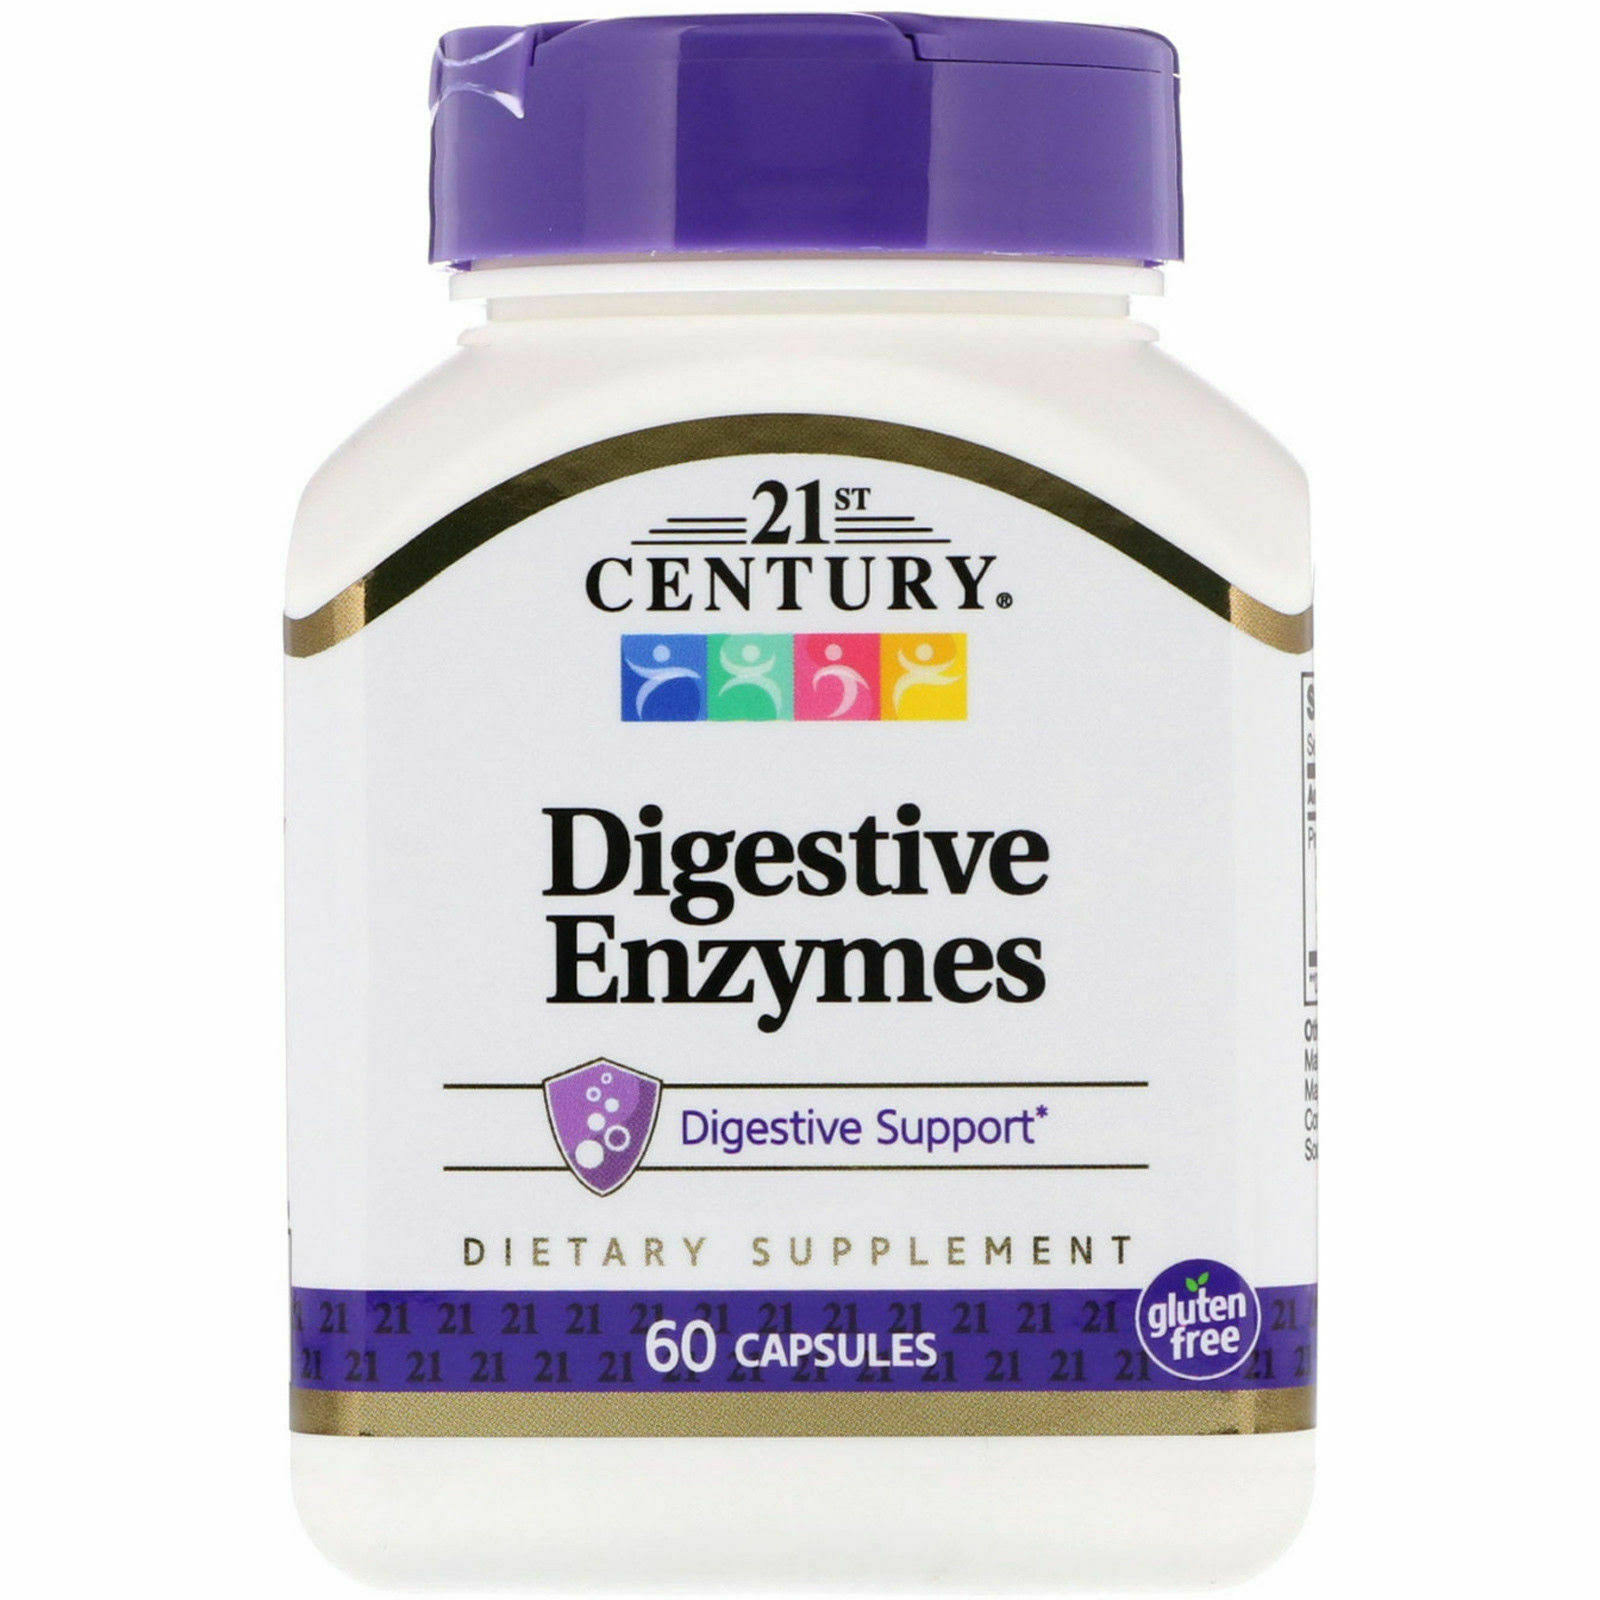 21st Century Digestive Enzymes Supplement - 60 Capsules